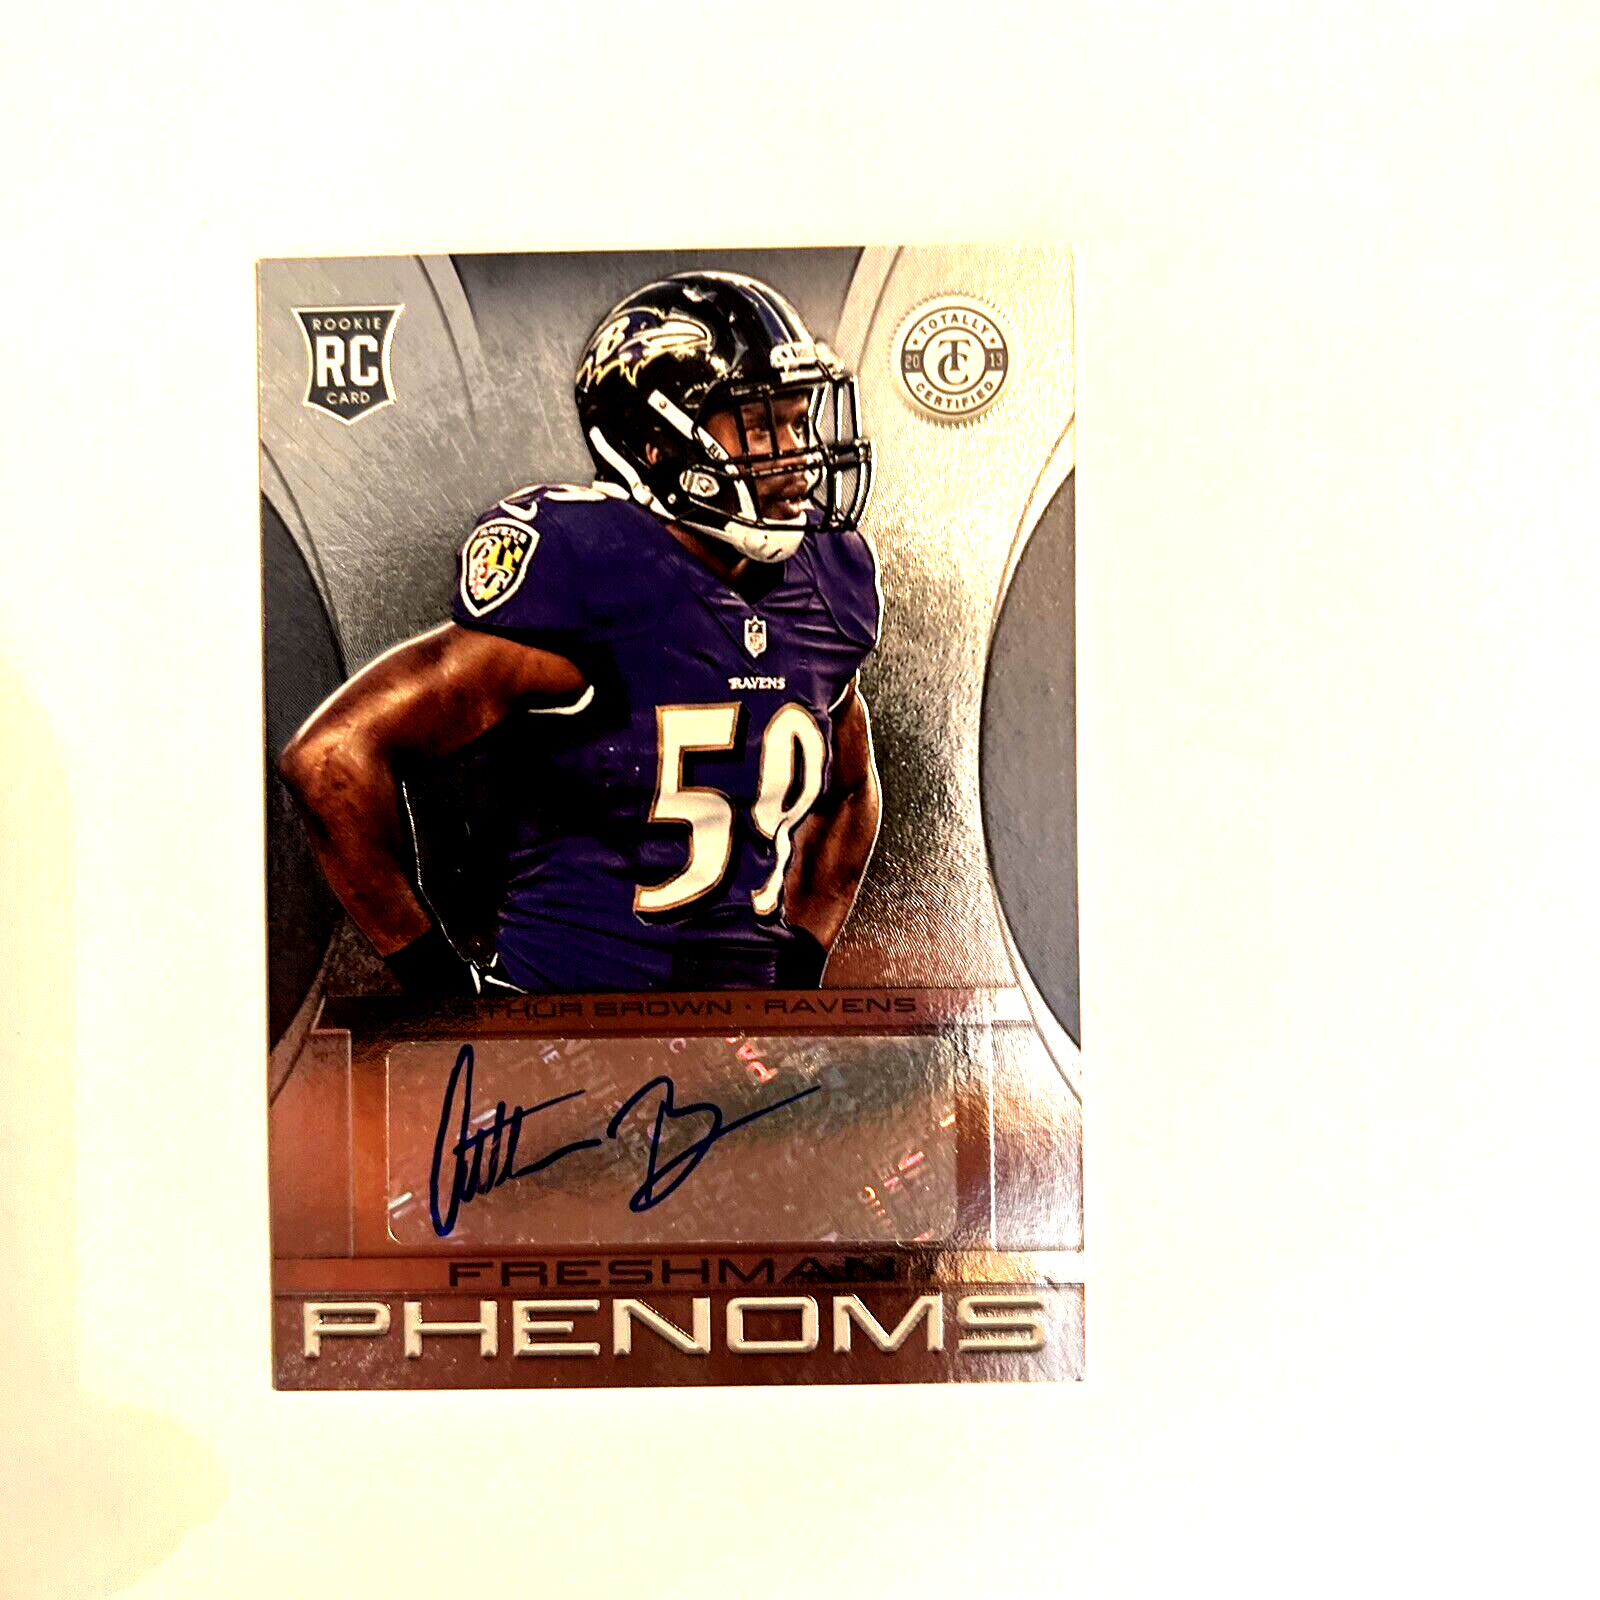 2013 Panini Totally Certified Arthur Brown Phenoms Signatures Rookie Card #/499. rookie card picture